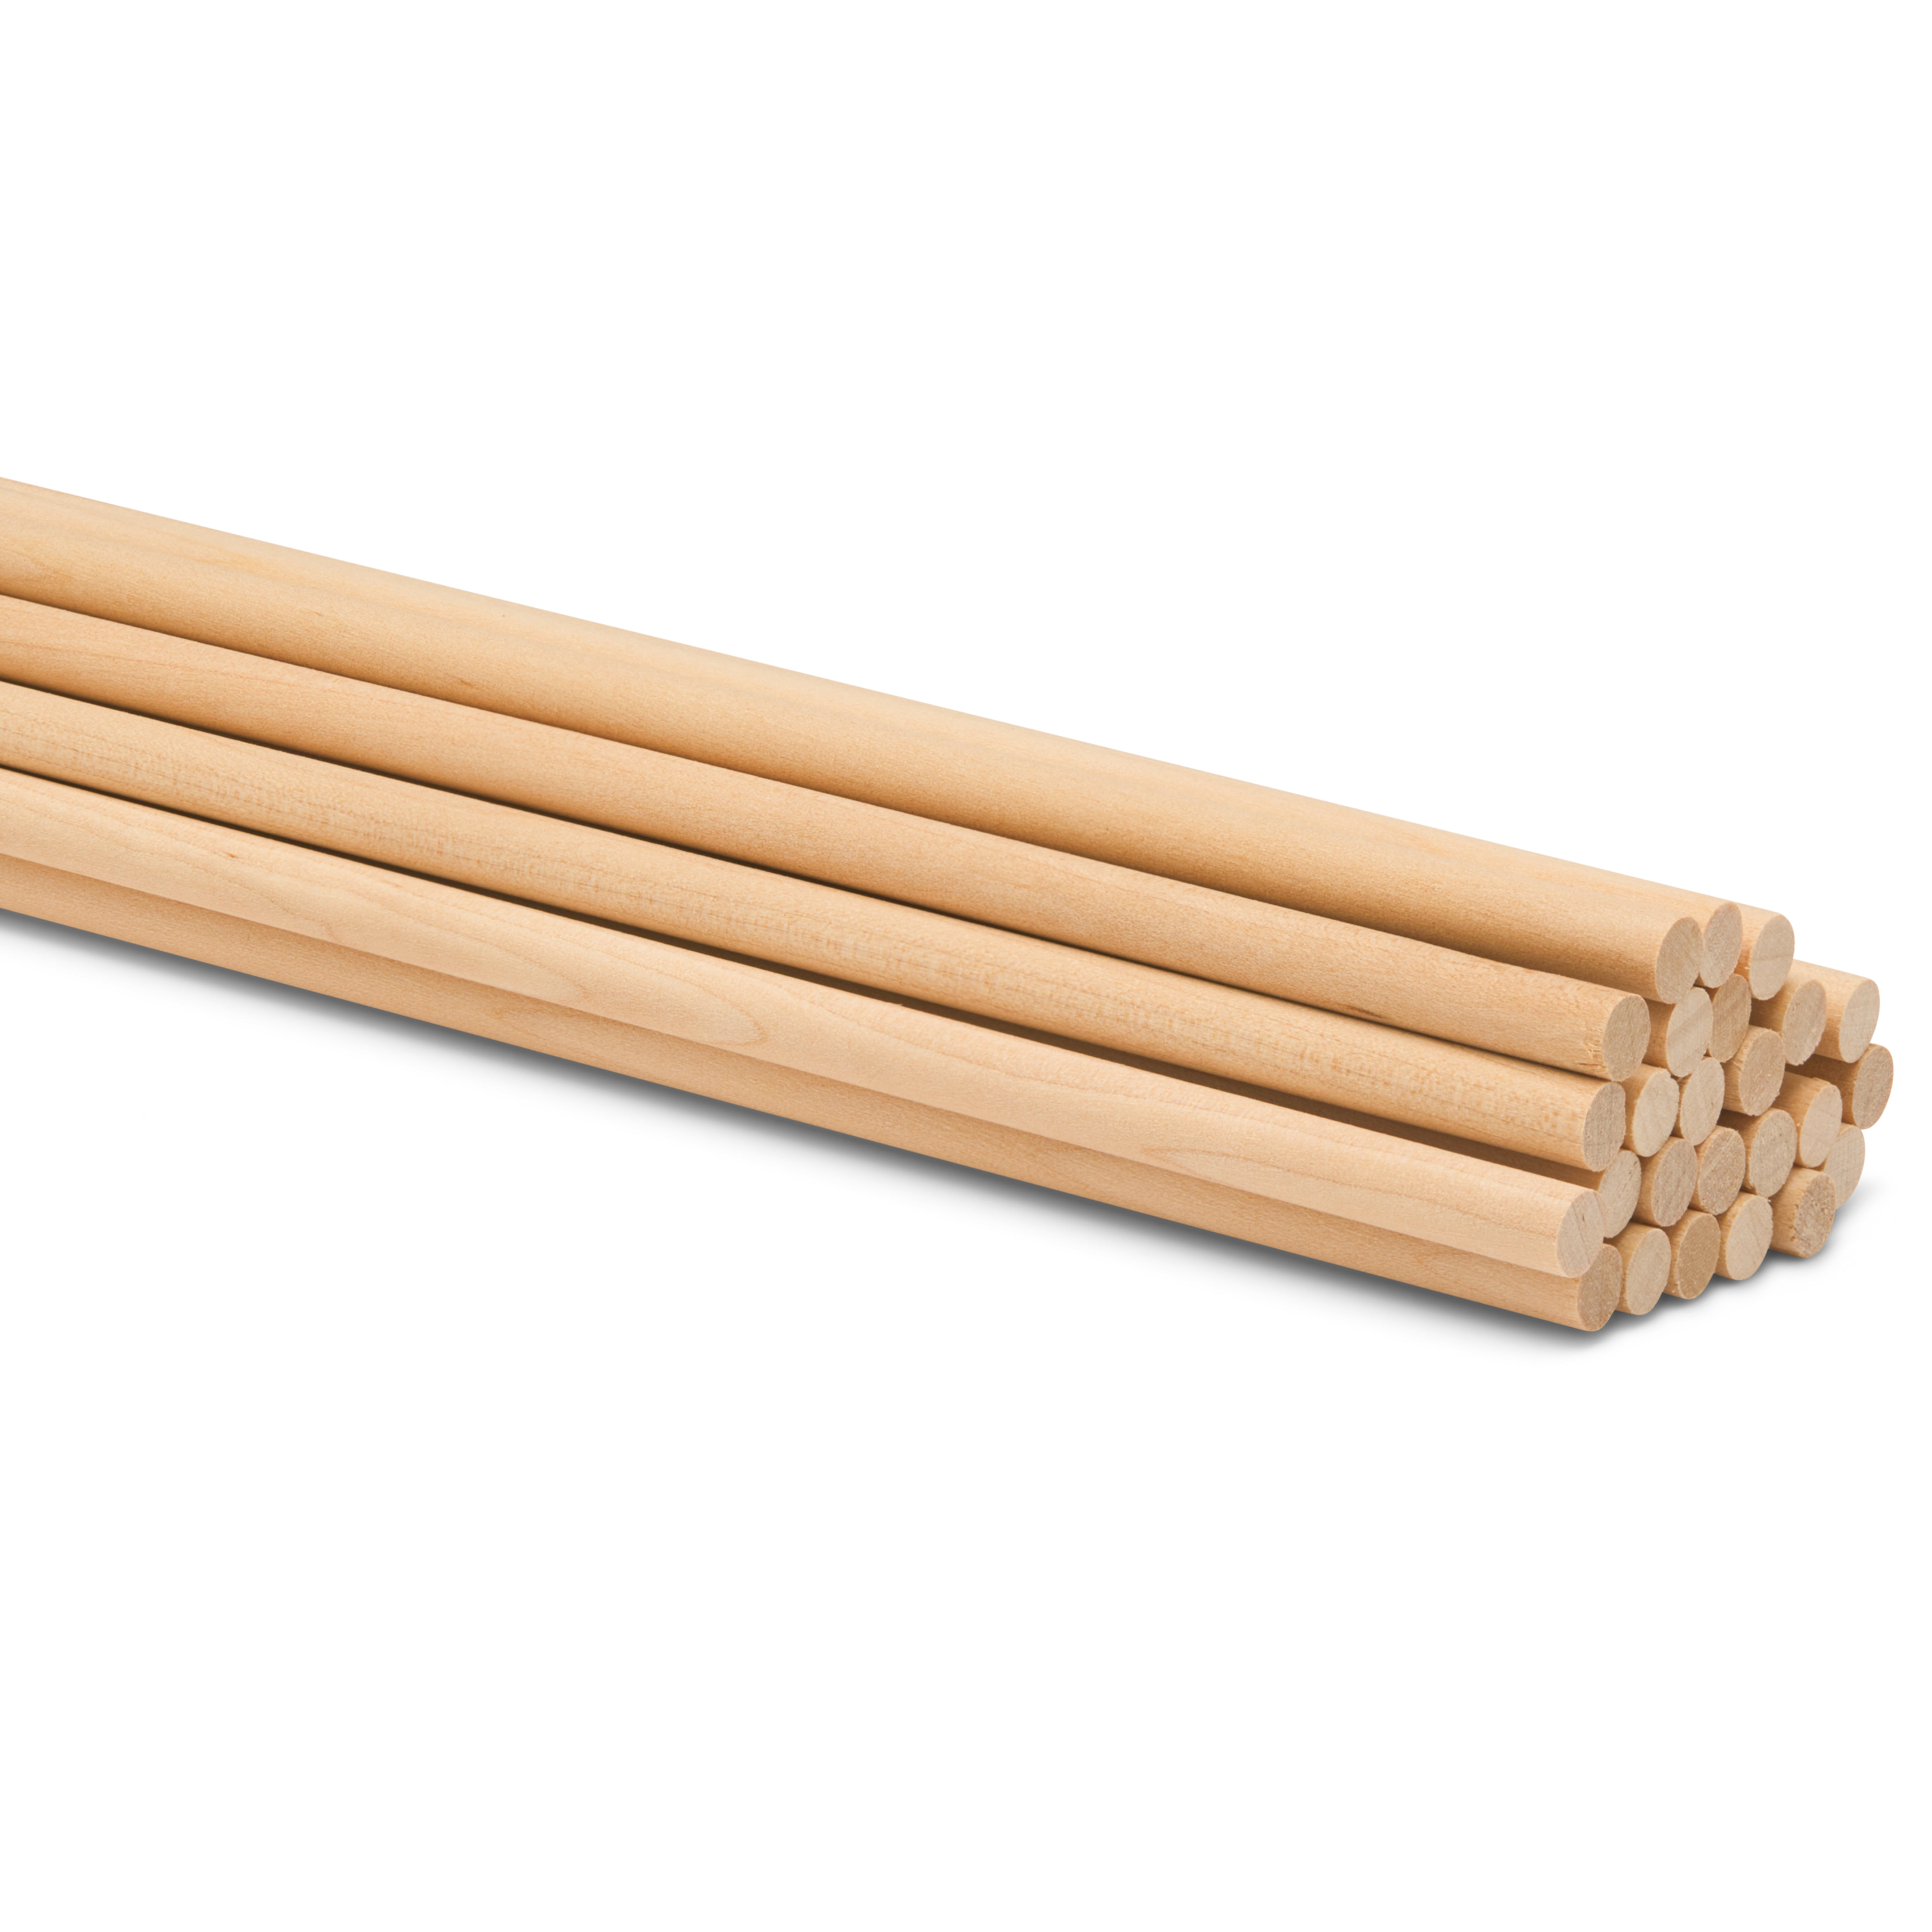 25PCS Dowel Rods Wood Sticks Wooden Dowel Rods 1/4 x 6 Inch Unfinished Bamboo Sticks for Crafts and DIYers 